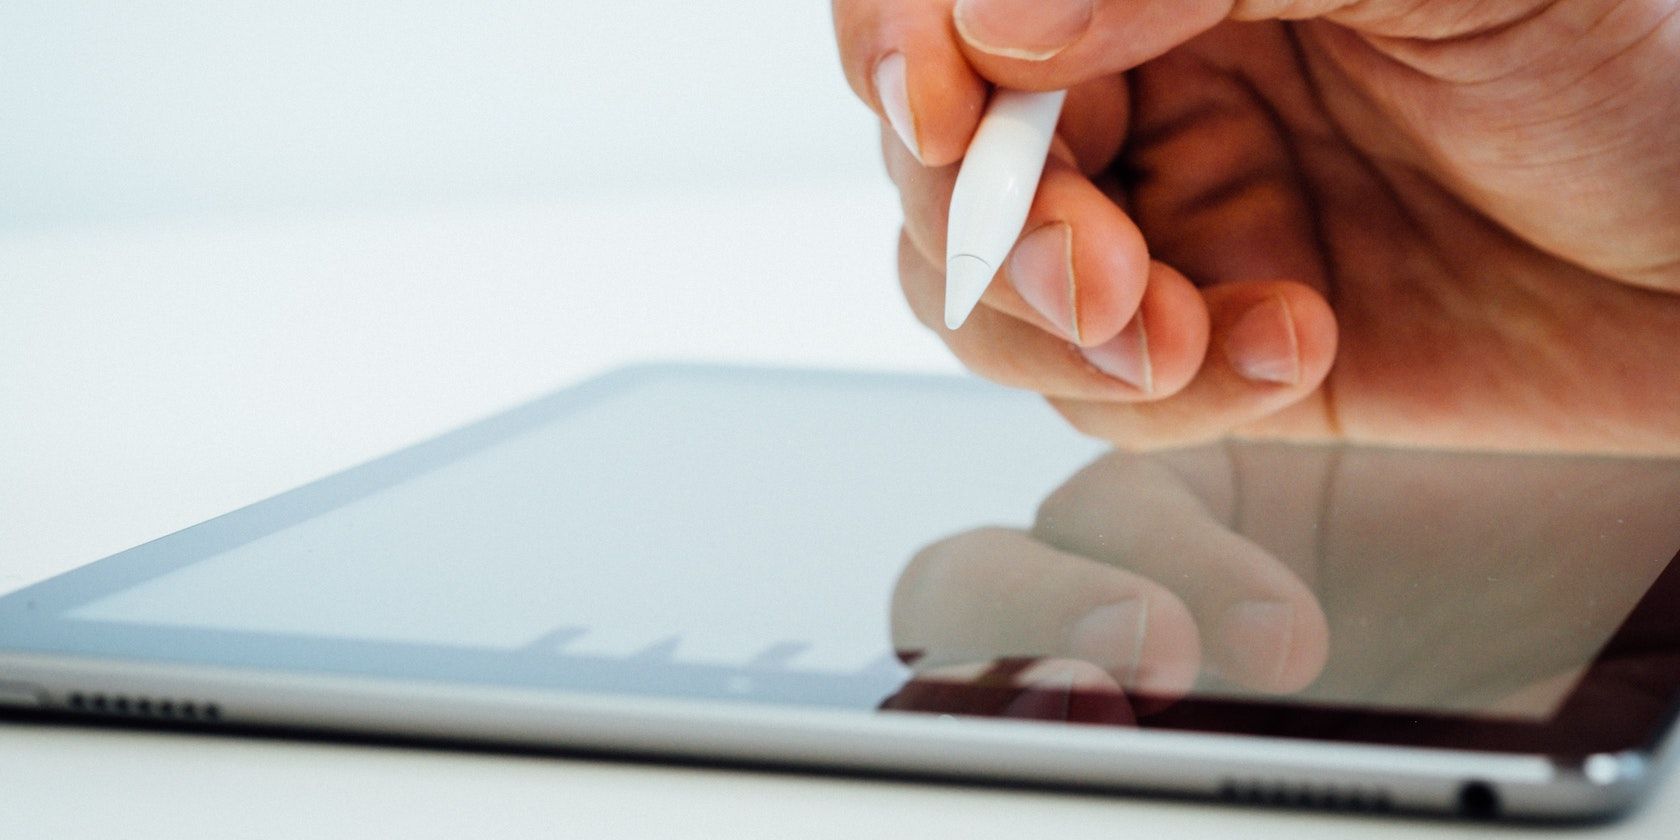 A person writing with their Apple Pencil on an iPad. Image from Unsplash. No attribution is needed.